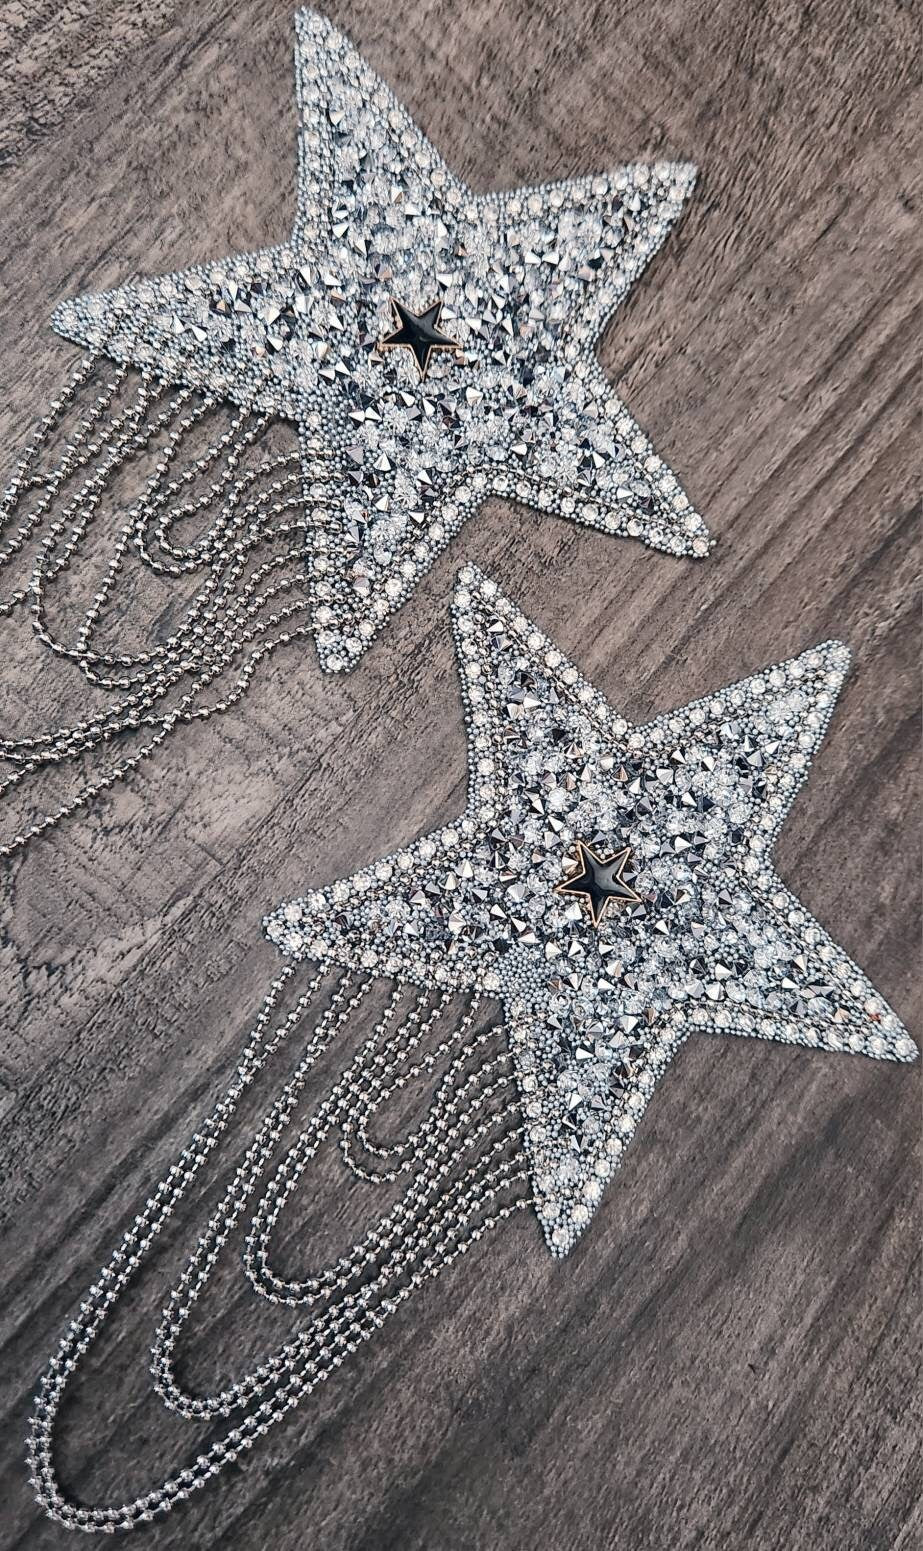 Exclusive, Silver 1-pc "Star" Rhinestone Dangling Chain Patch, Size 3" w/Tassels, Cool Applique For Clothing, Iron-on Patch, Sparkling Patch